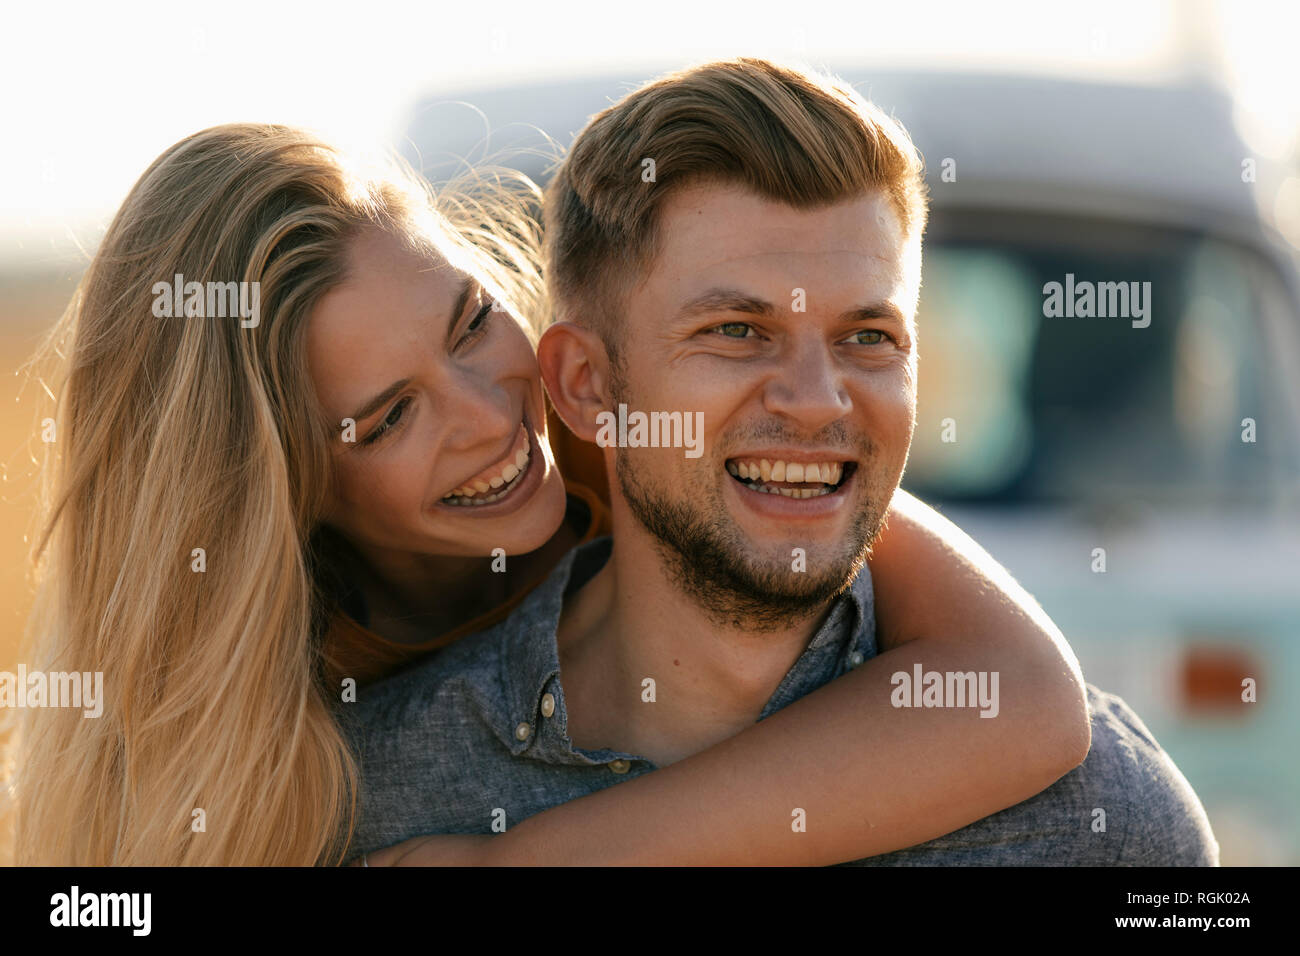 Happy affectionate young couple at camper van Stock Photo